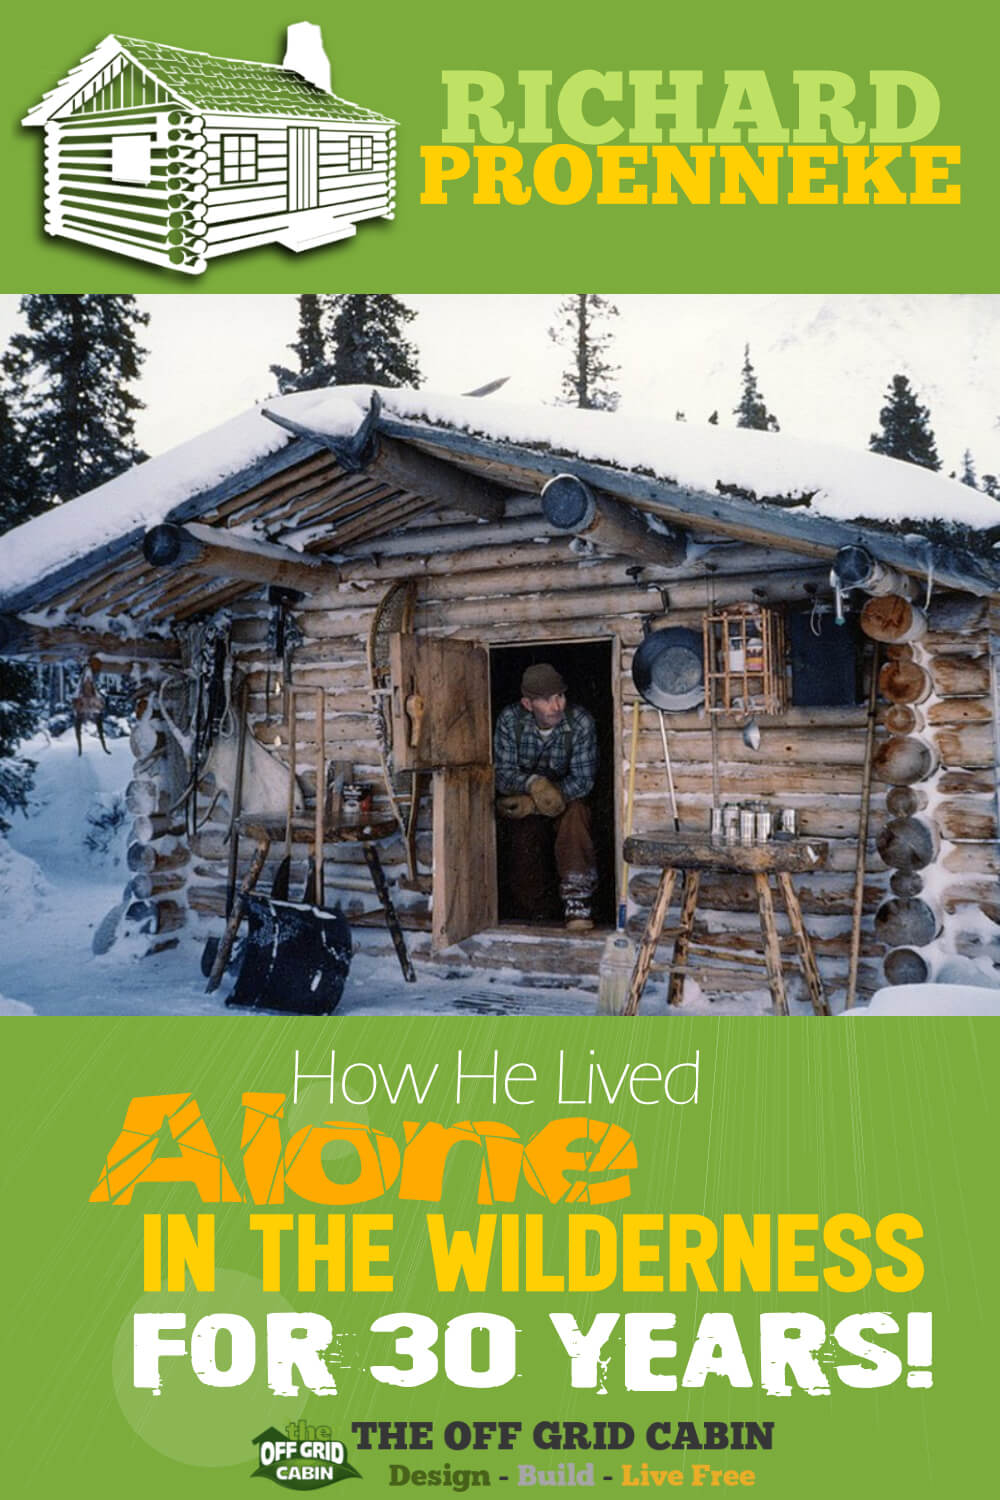 How Richard Proenneke Lived Alone in the Wilderness for 30 Years Pin